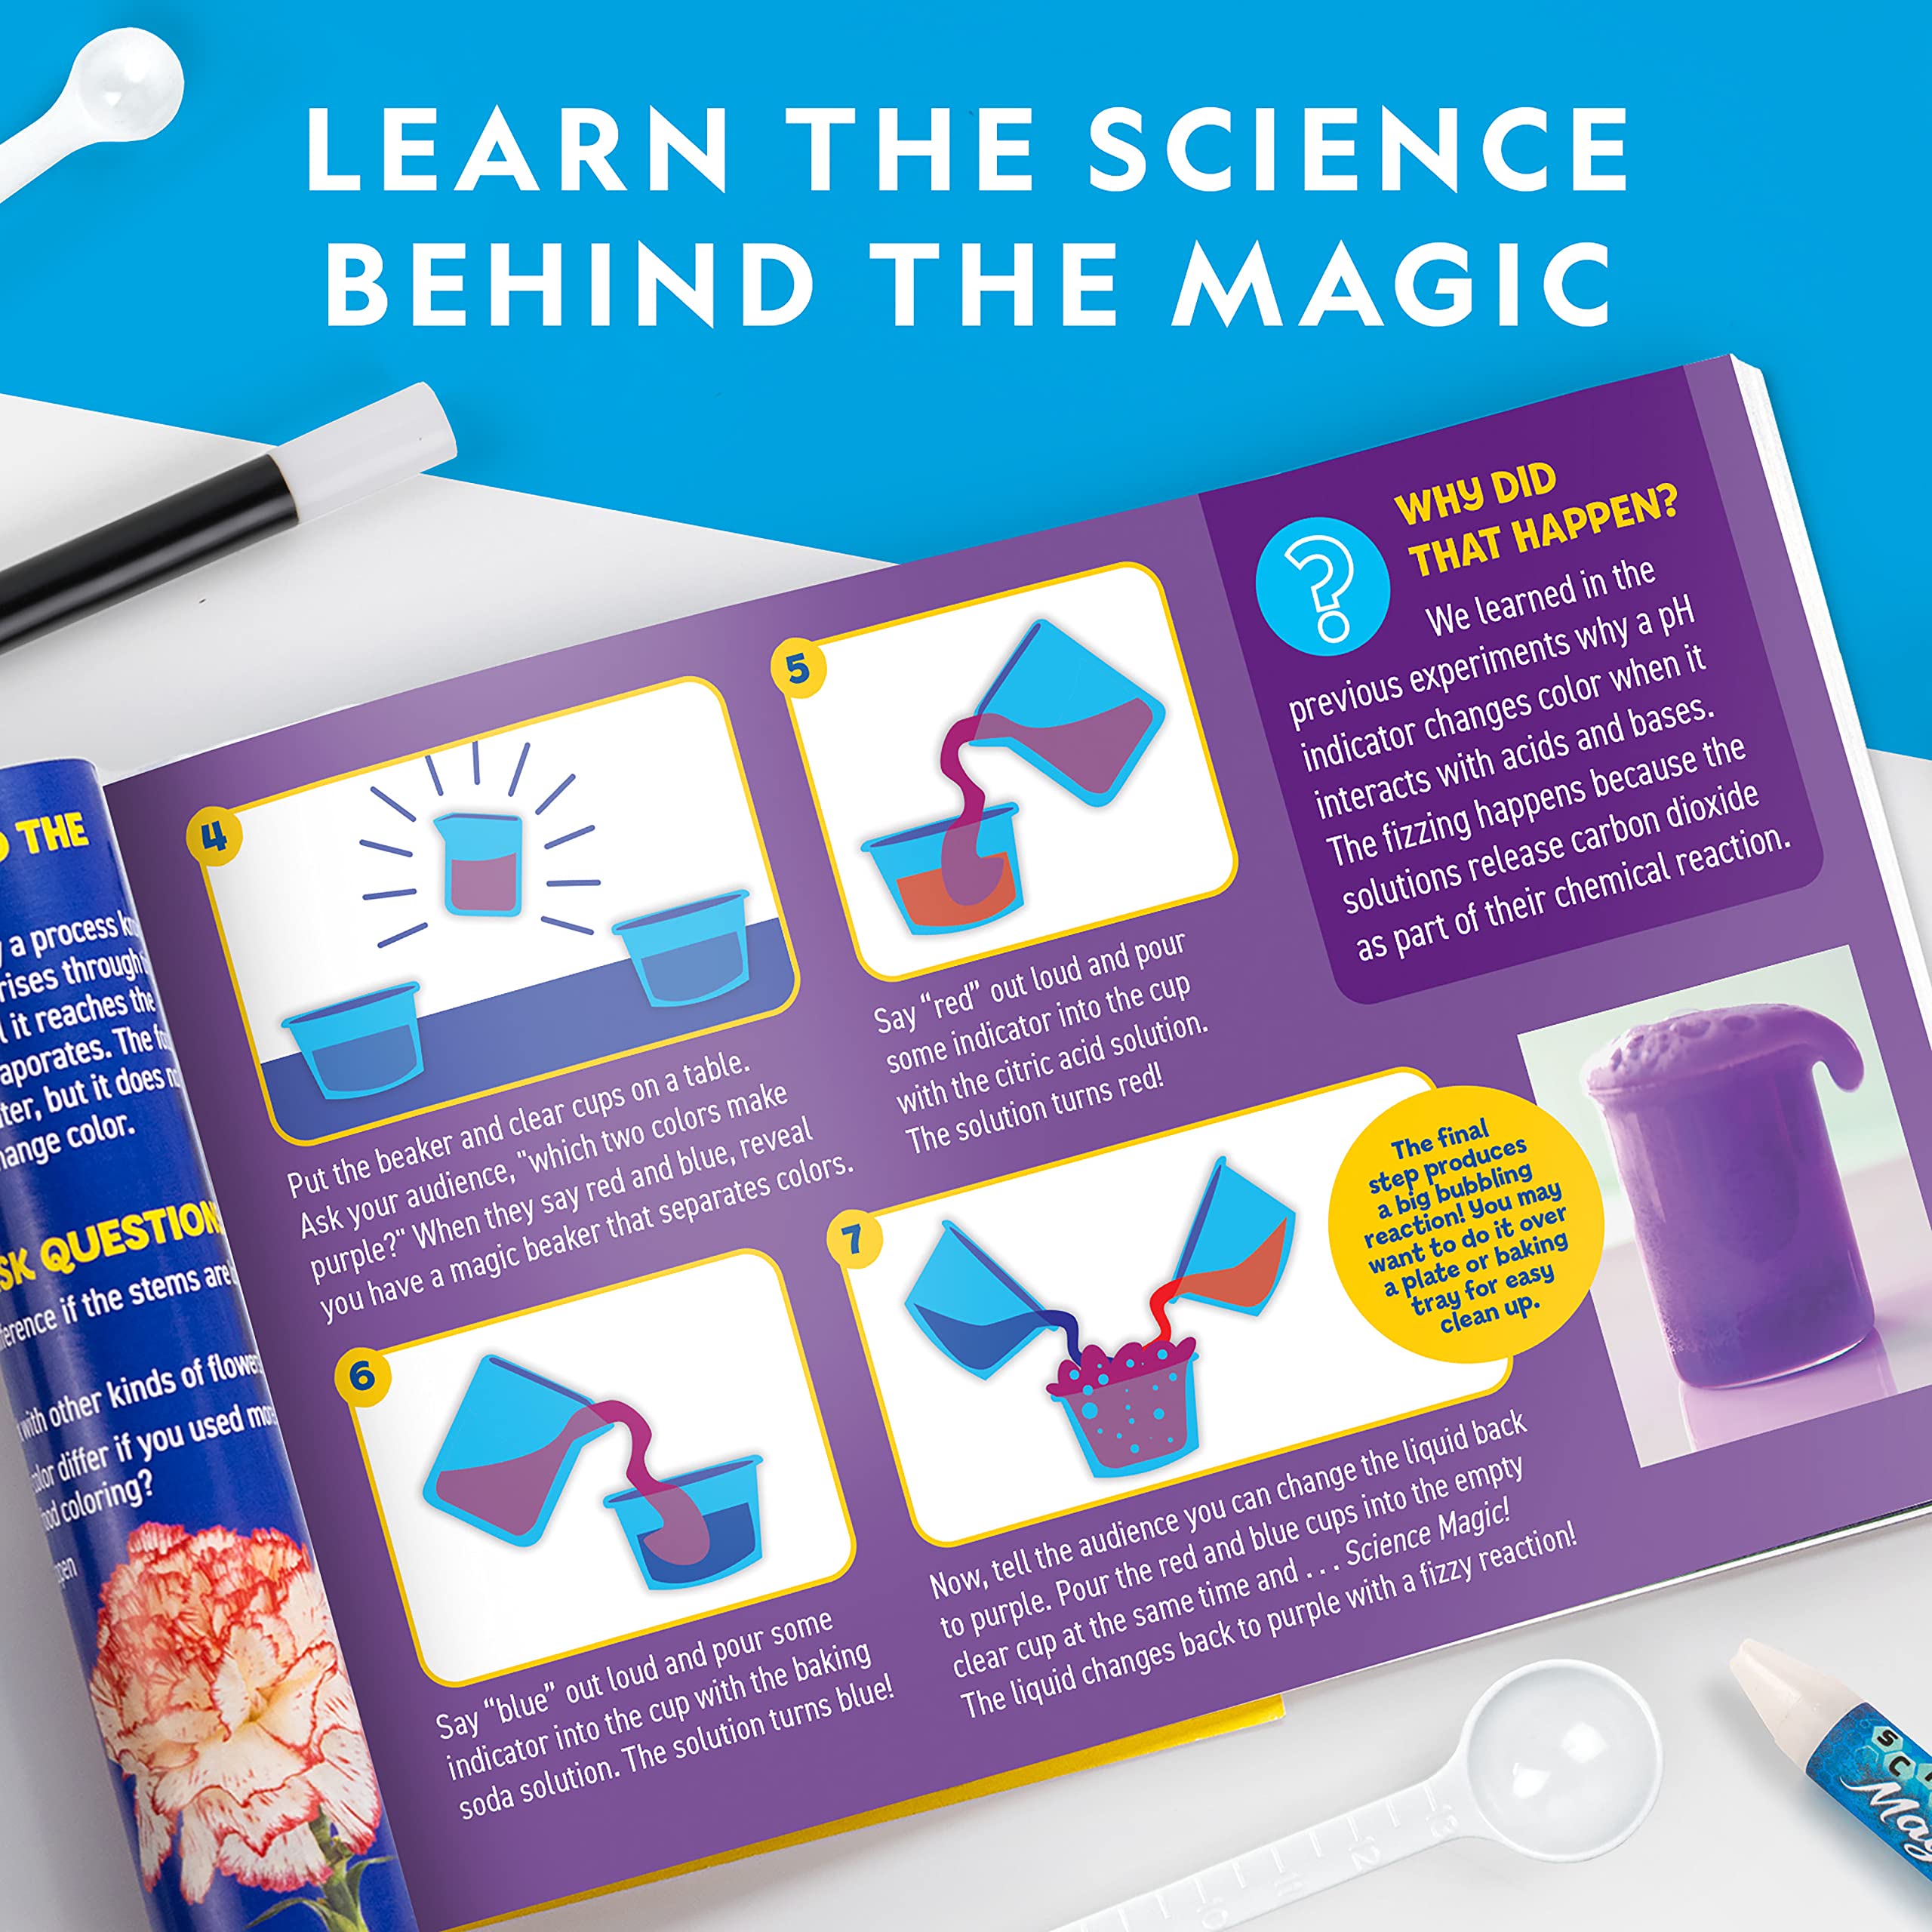 NATIONAL GEOGRAPHIC Magic Chemistry Set – Science Kit for Kids with 10 Amazing Magic Tricks, STEM Projects and Science Experiments, Science Toys, Great Gift for Boys and Girls 8-12 (Amazon Exclusive)